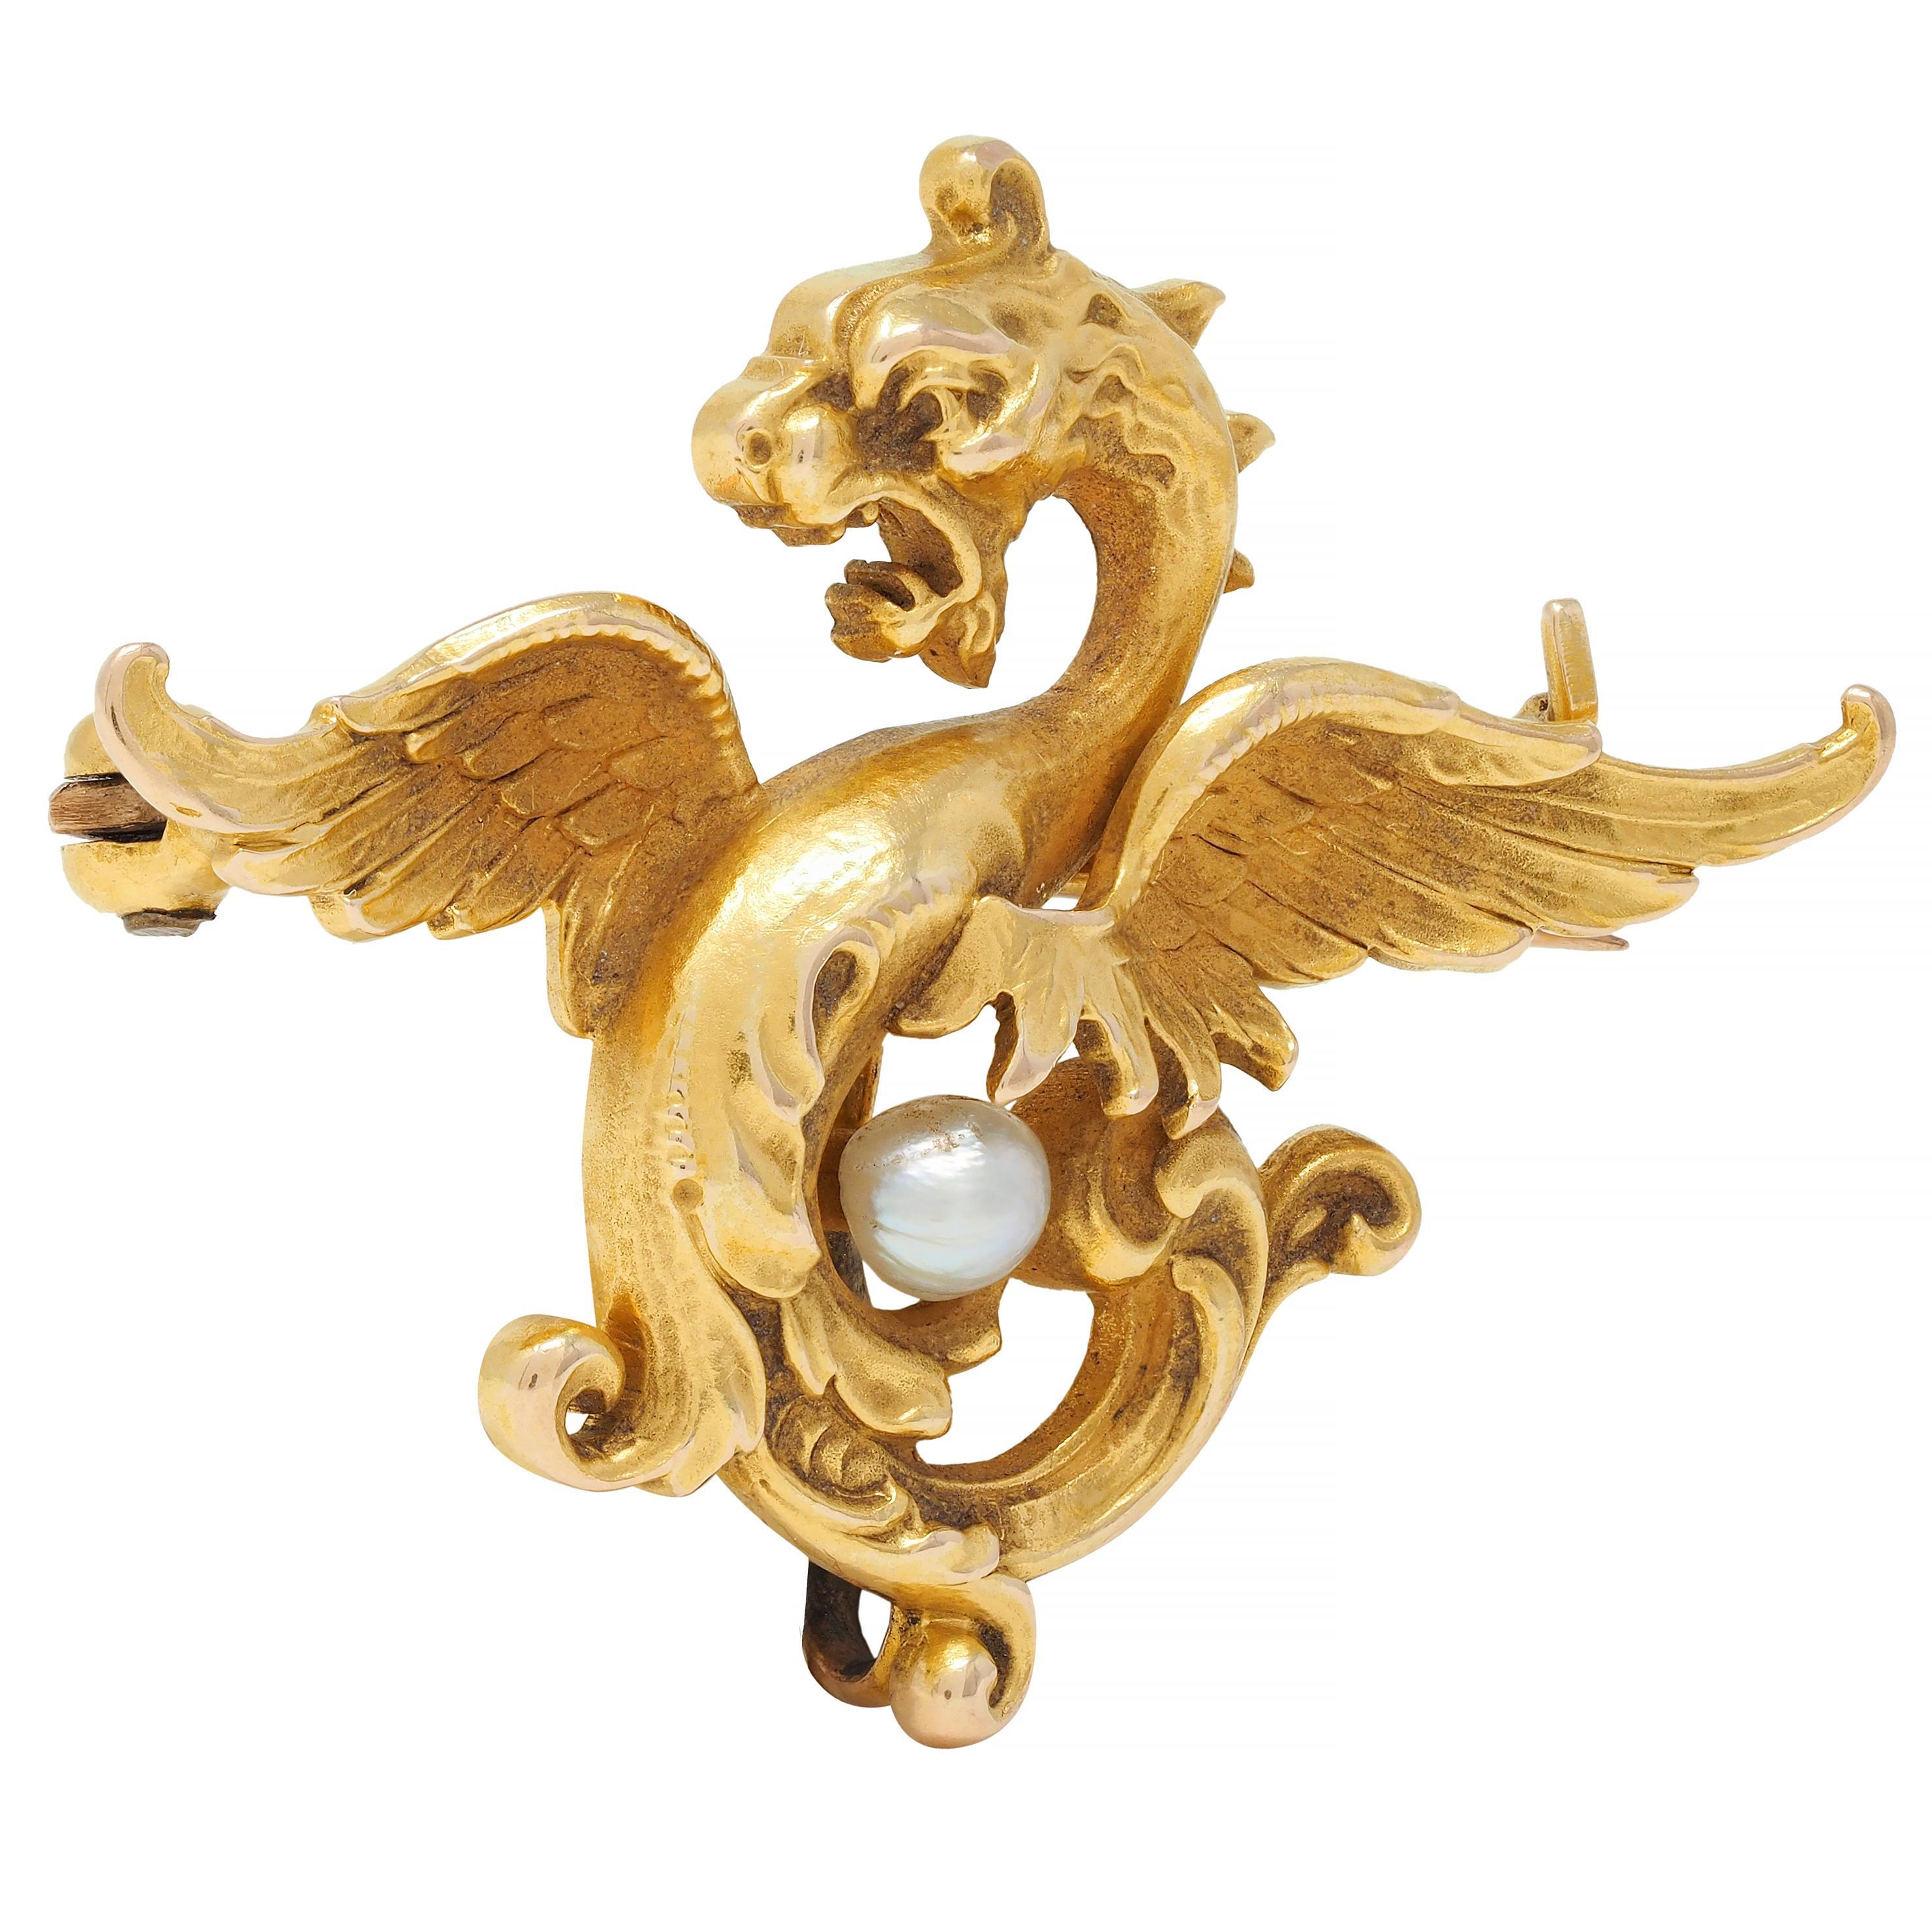 Designed as a stylized dragon creature with fierce expression, spread wings, and furling tail
Dimensional with engraved and grooved textured detailing 
Tail curls around a near-round baroque pearl 
Gray body color with moderate iridescence